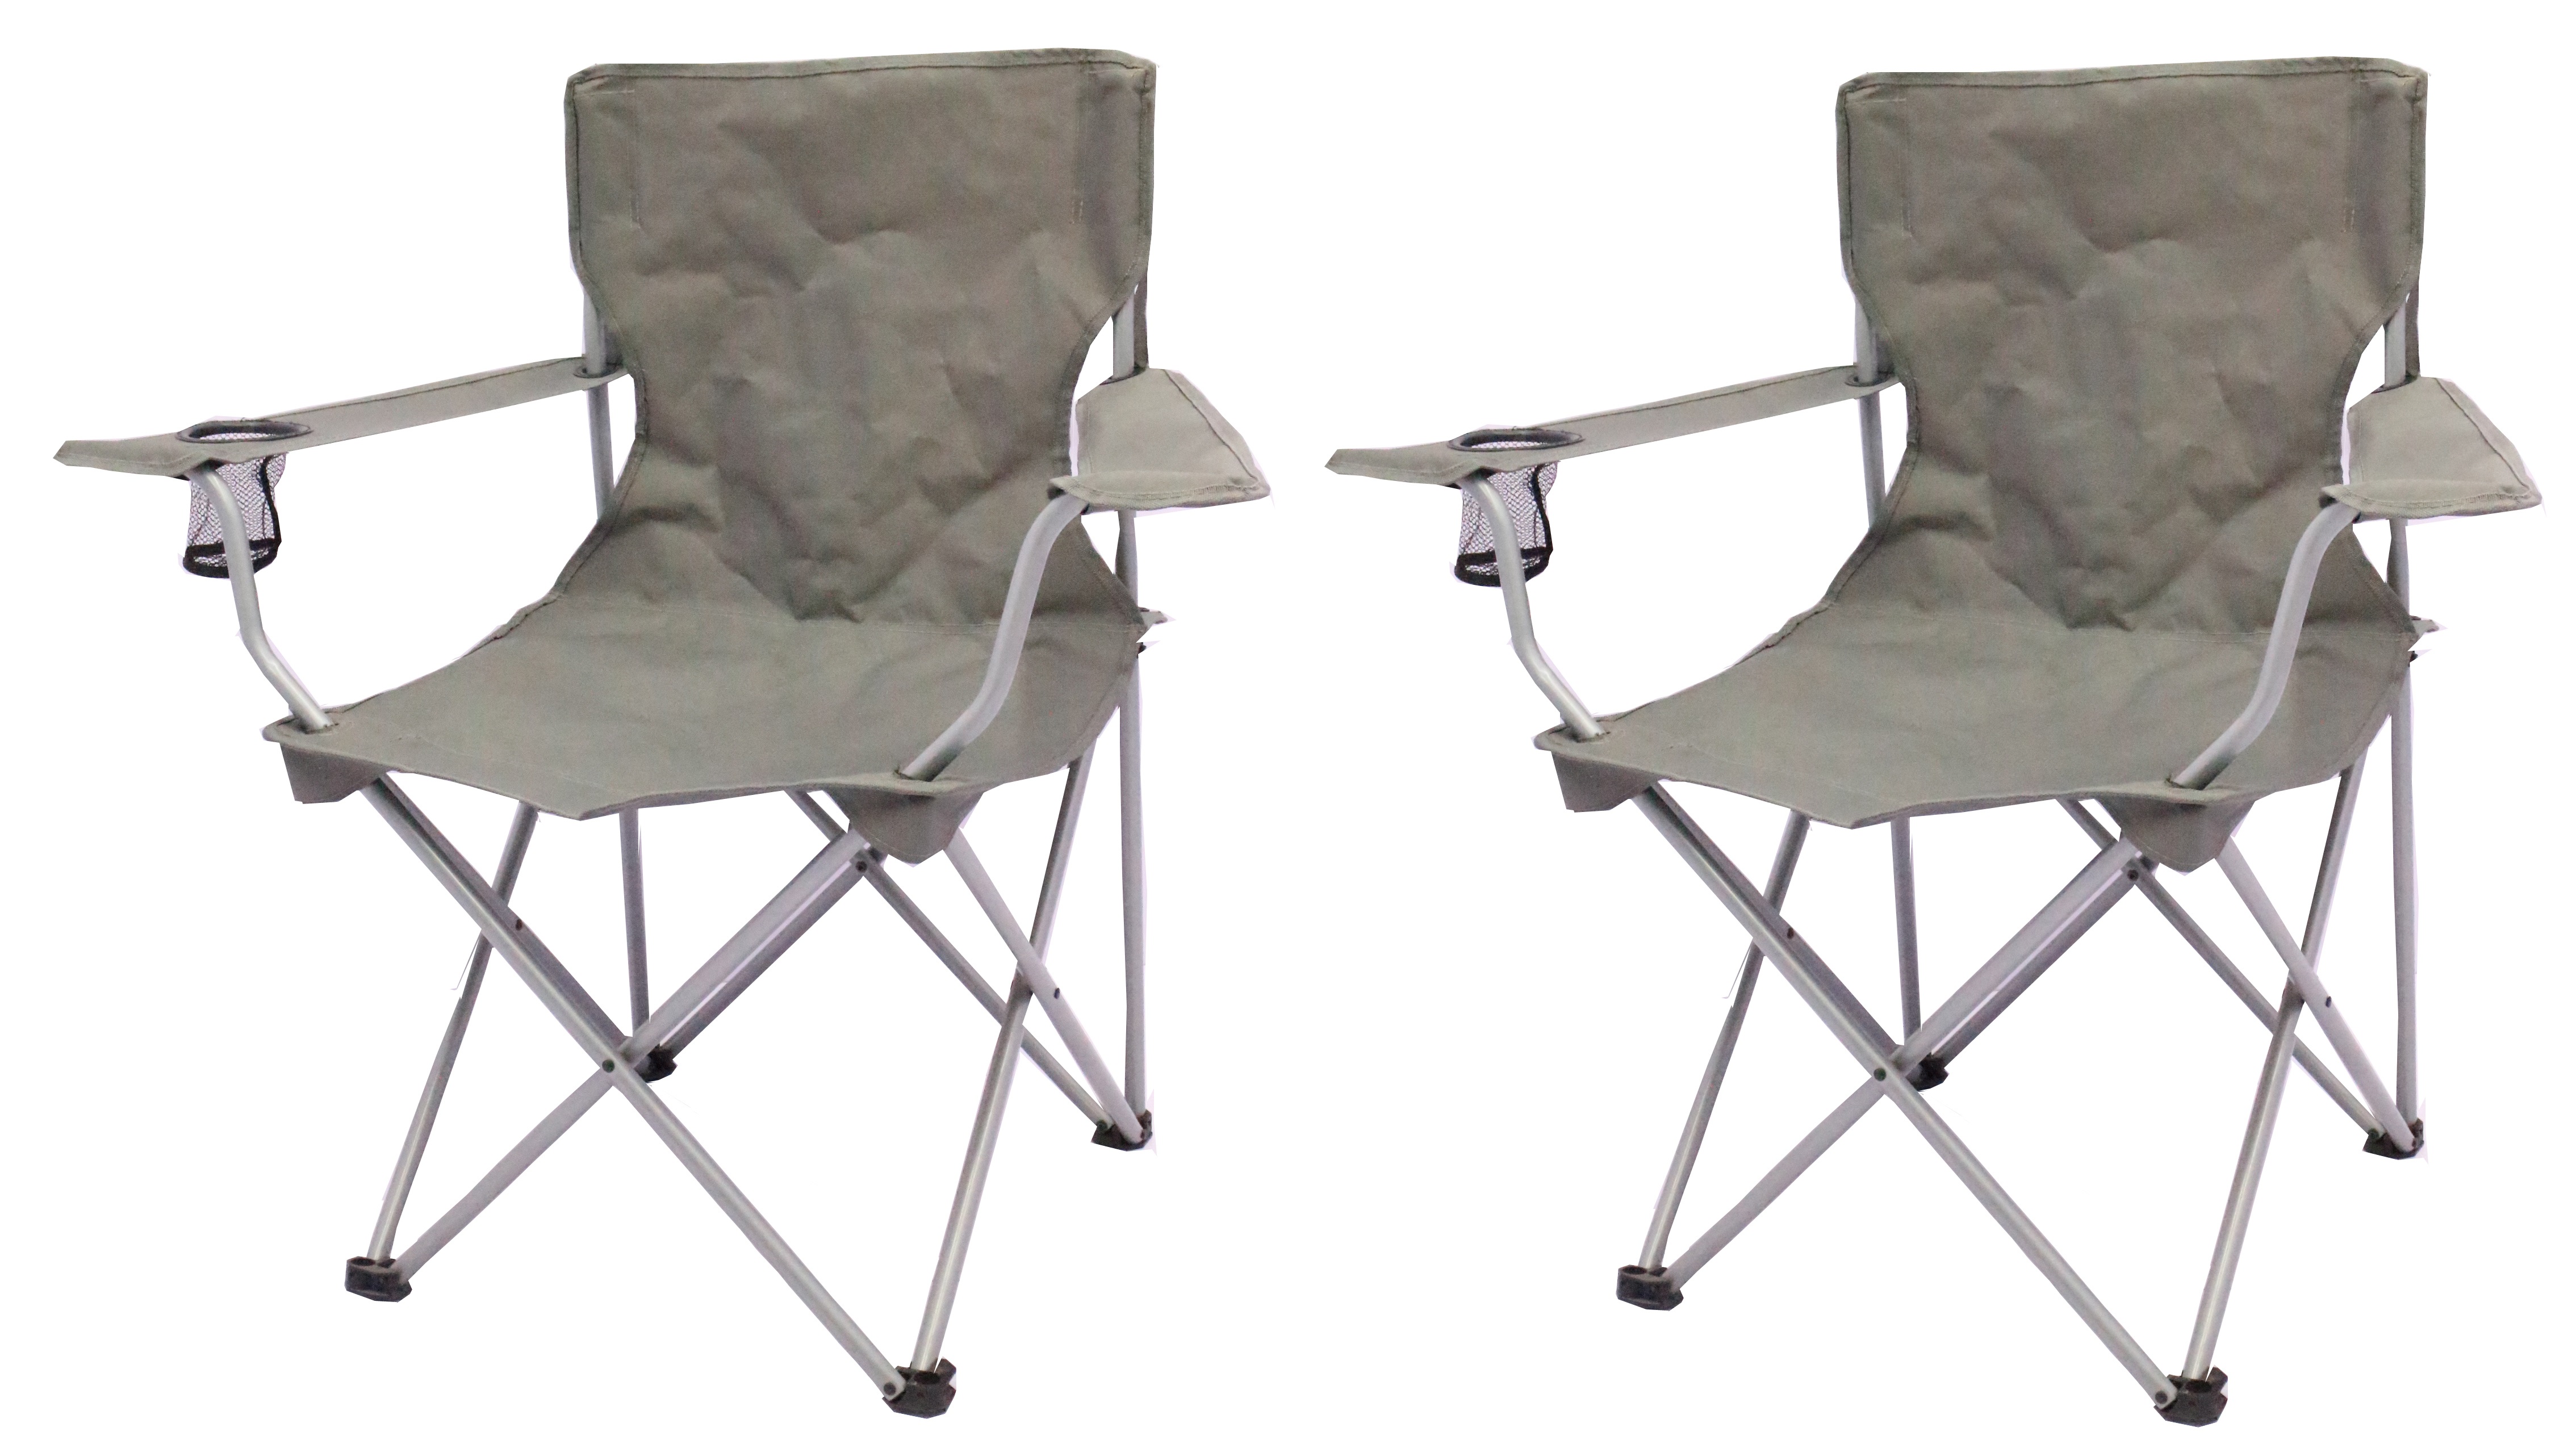 Ozark Trail Quad Folding Camp Chair 2 Pack,with Mesh Cup Holder - image 1 of 17